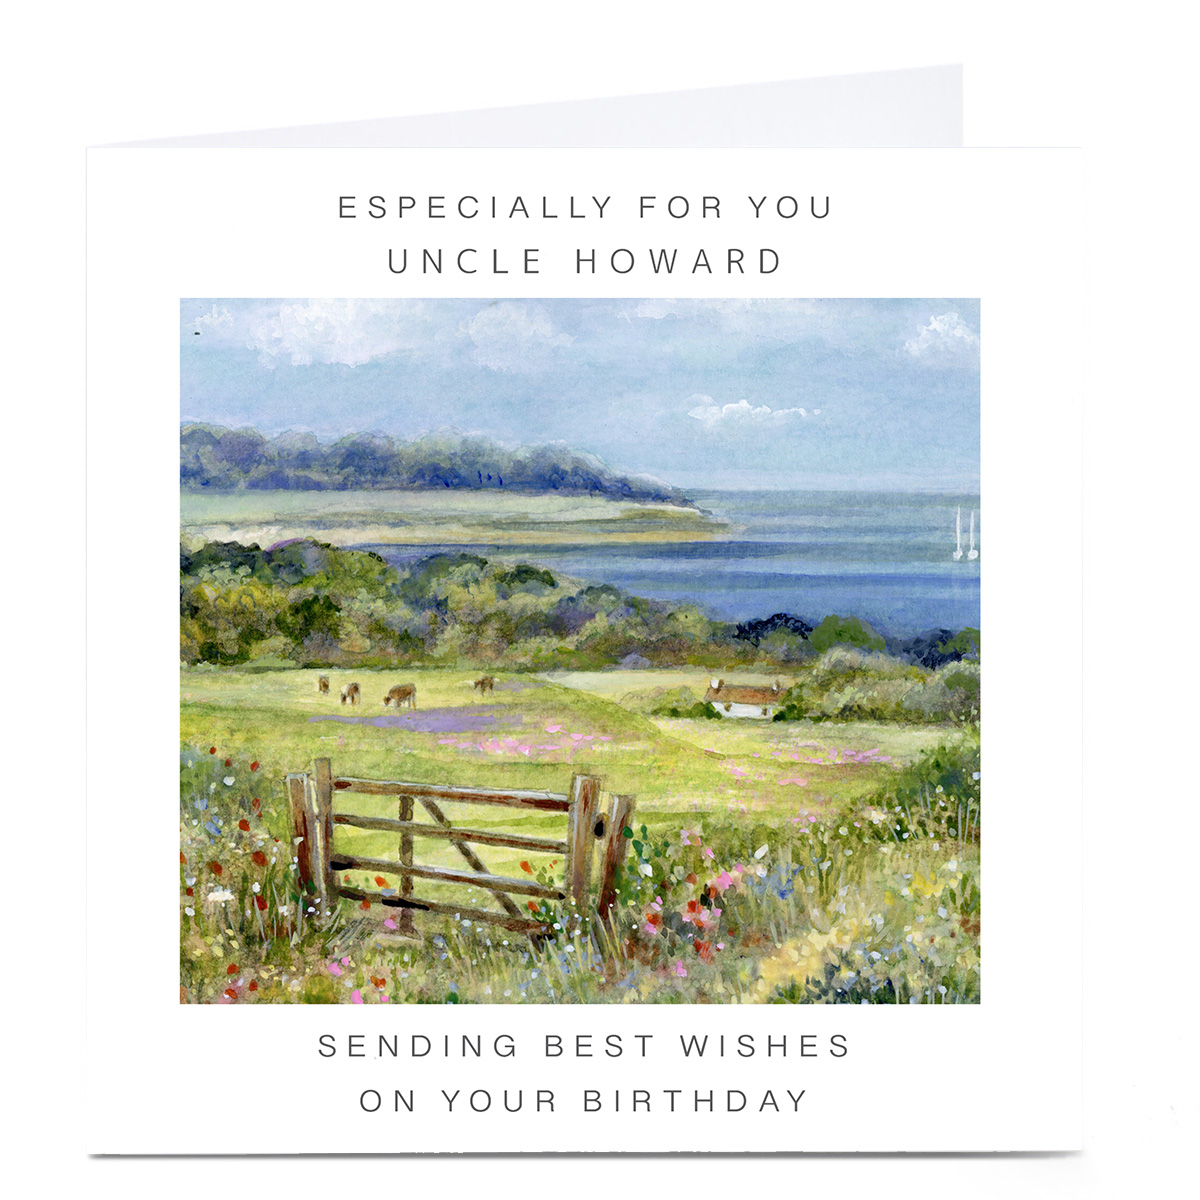 Personalised Birthday Card - Especially For You Countryside